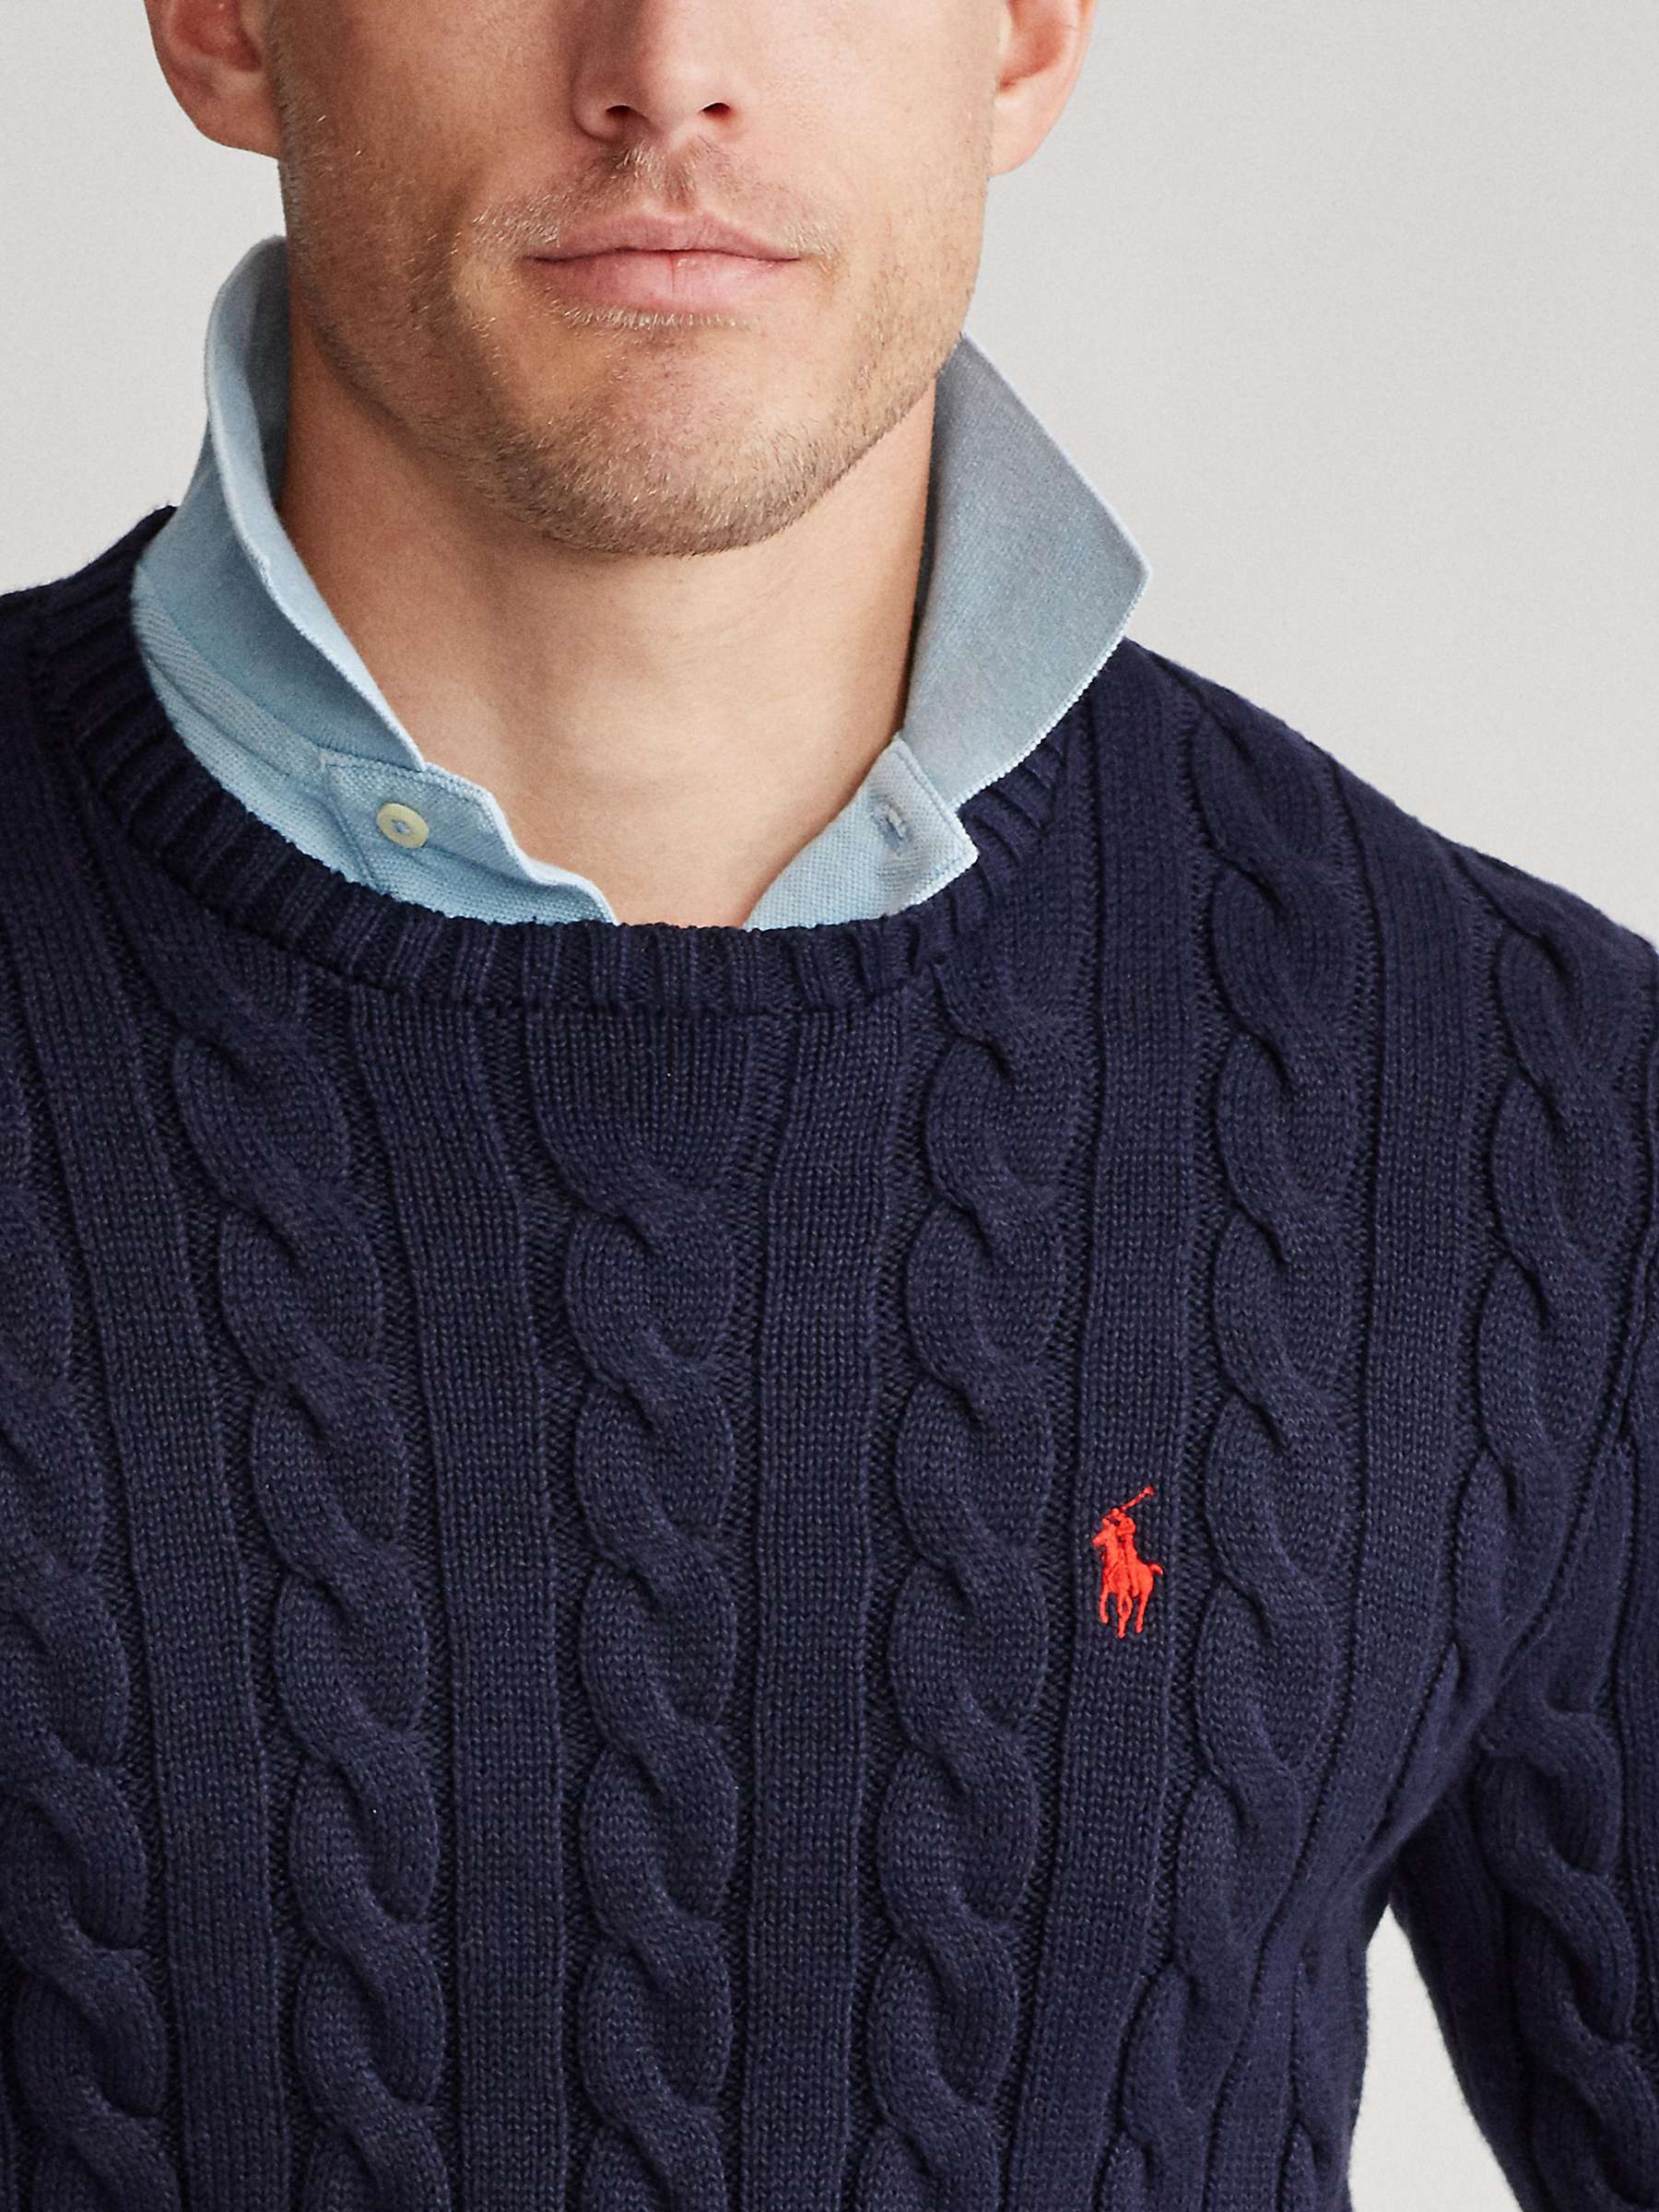 Buy Polo Ralph Lauren  Big & Tall Cable Knit Cotton Jumper Online at johnlewis.com